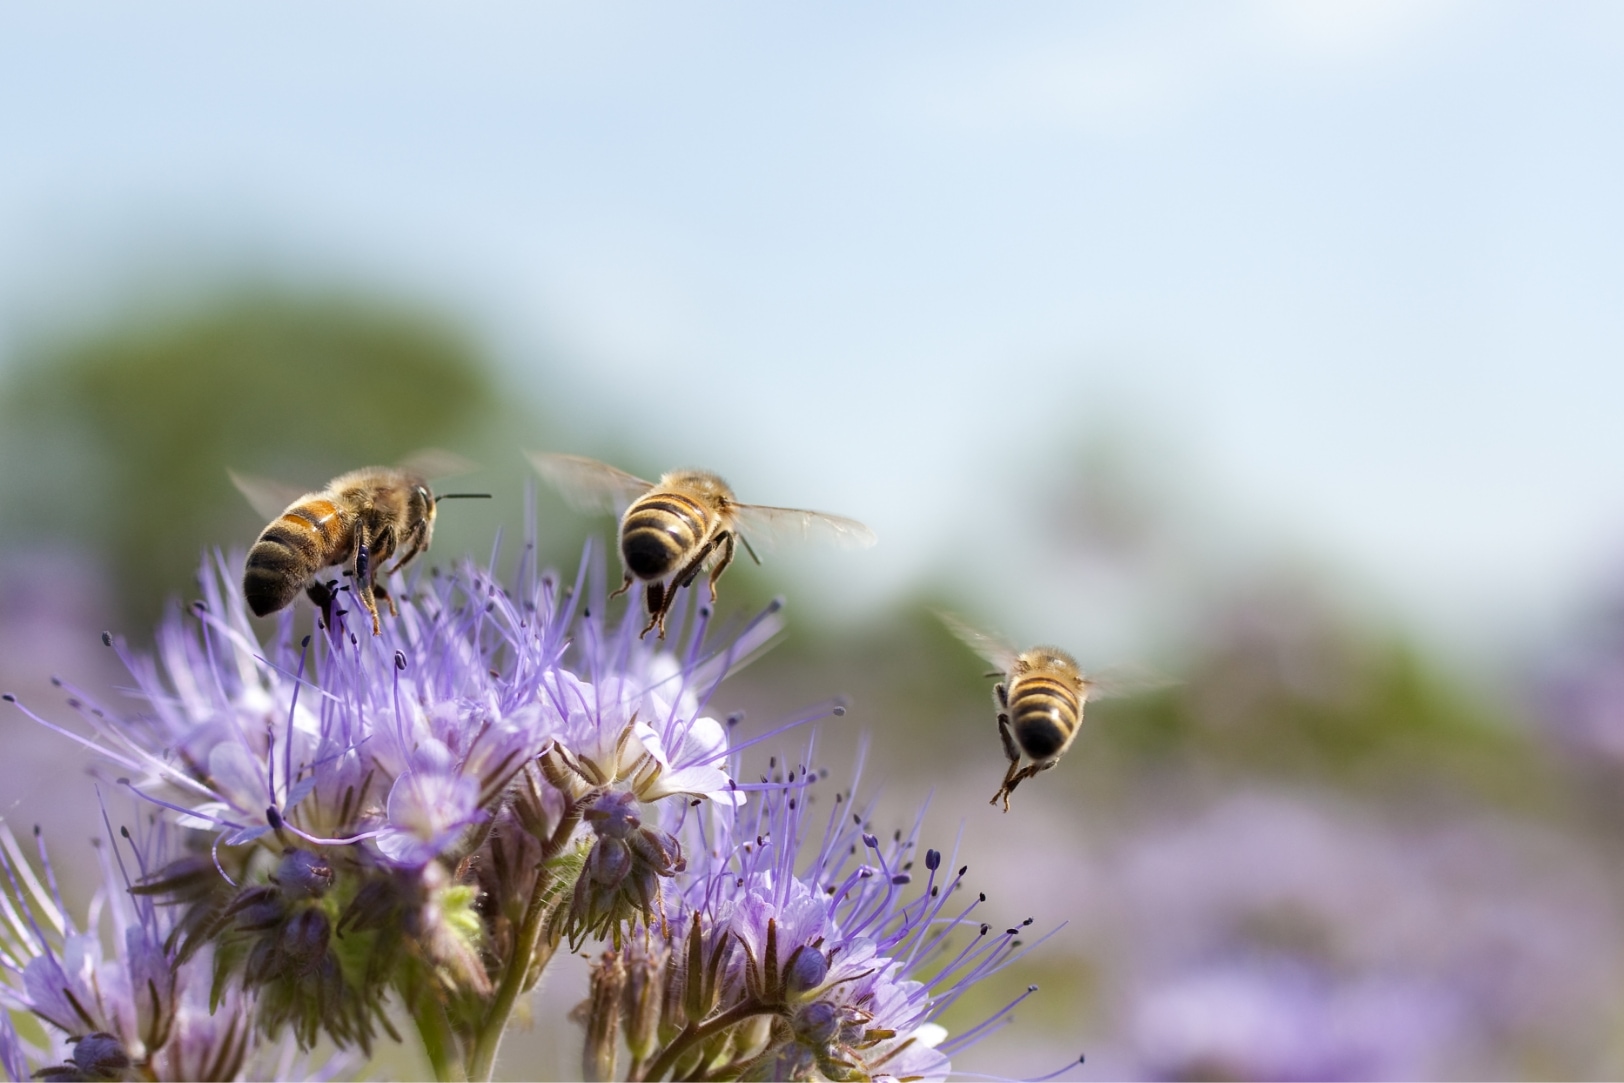 pic-bees-flying-away-from-purple-flowers-1624x1083